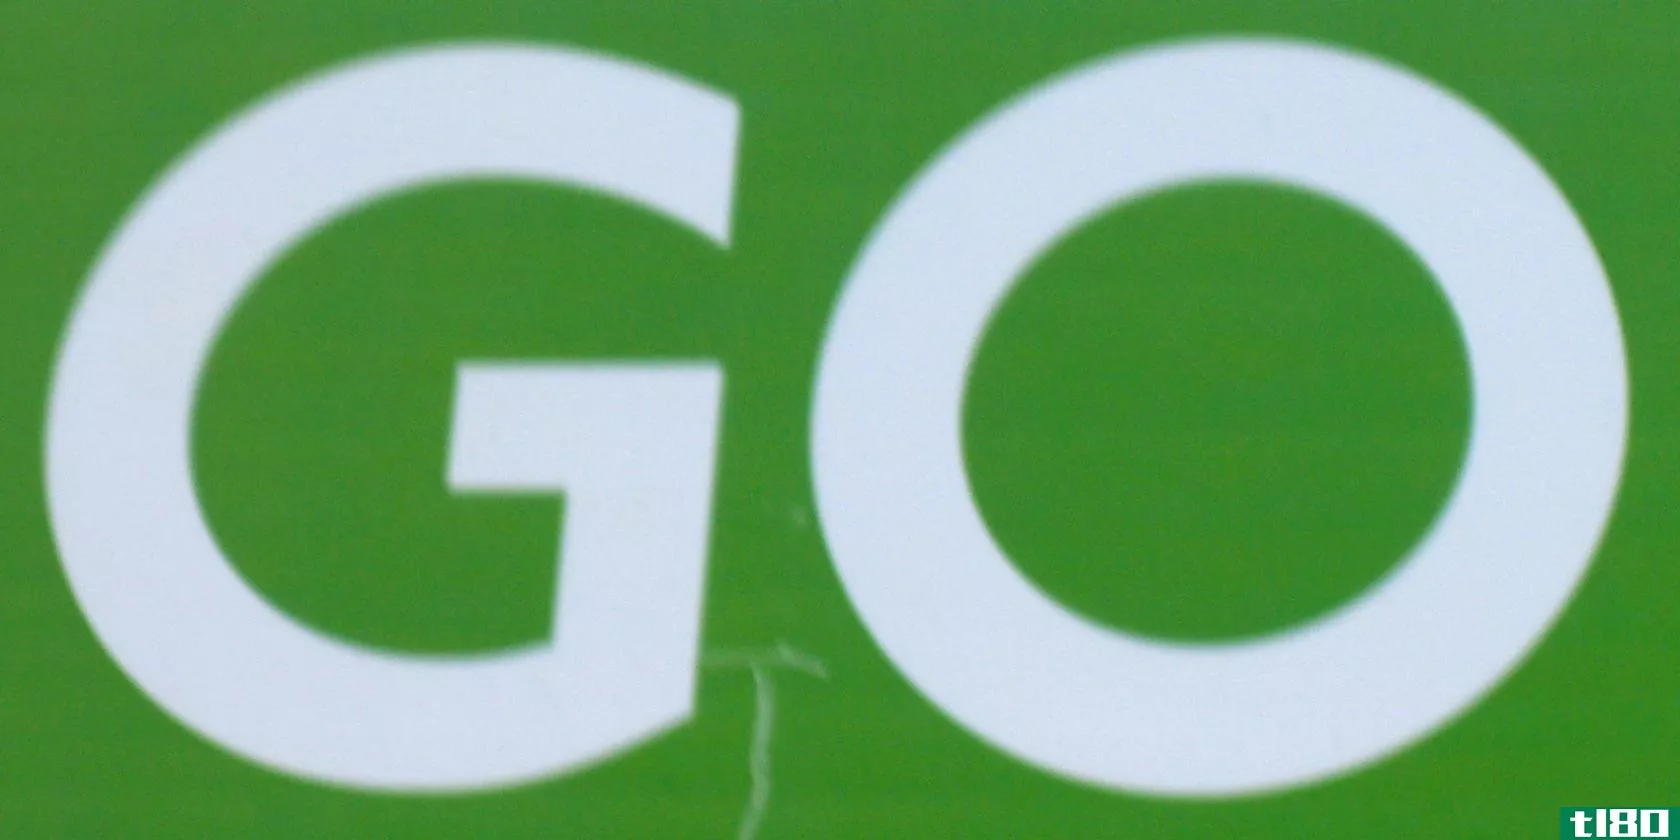 green-go-sign